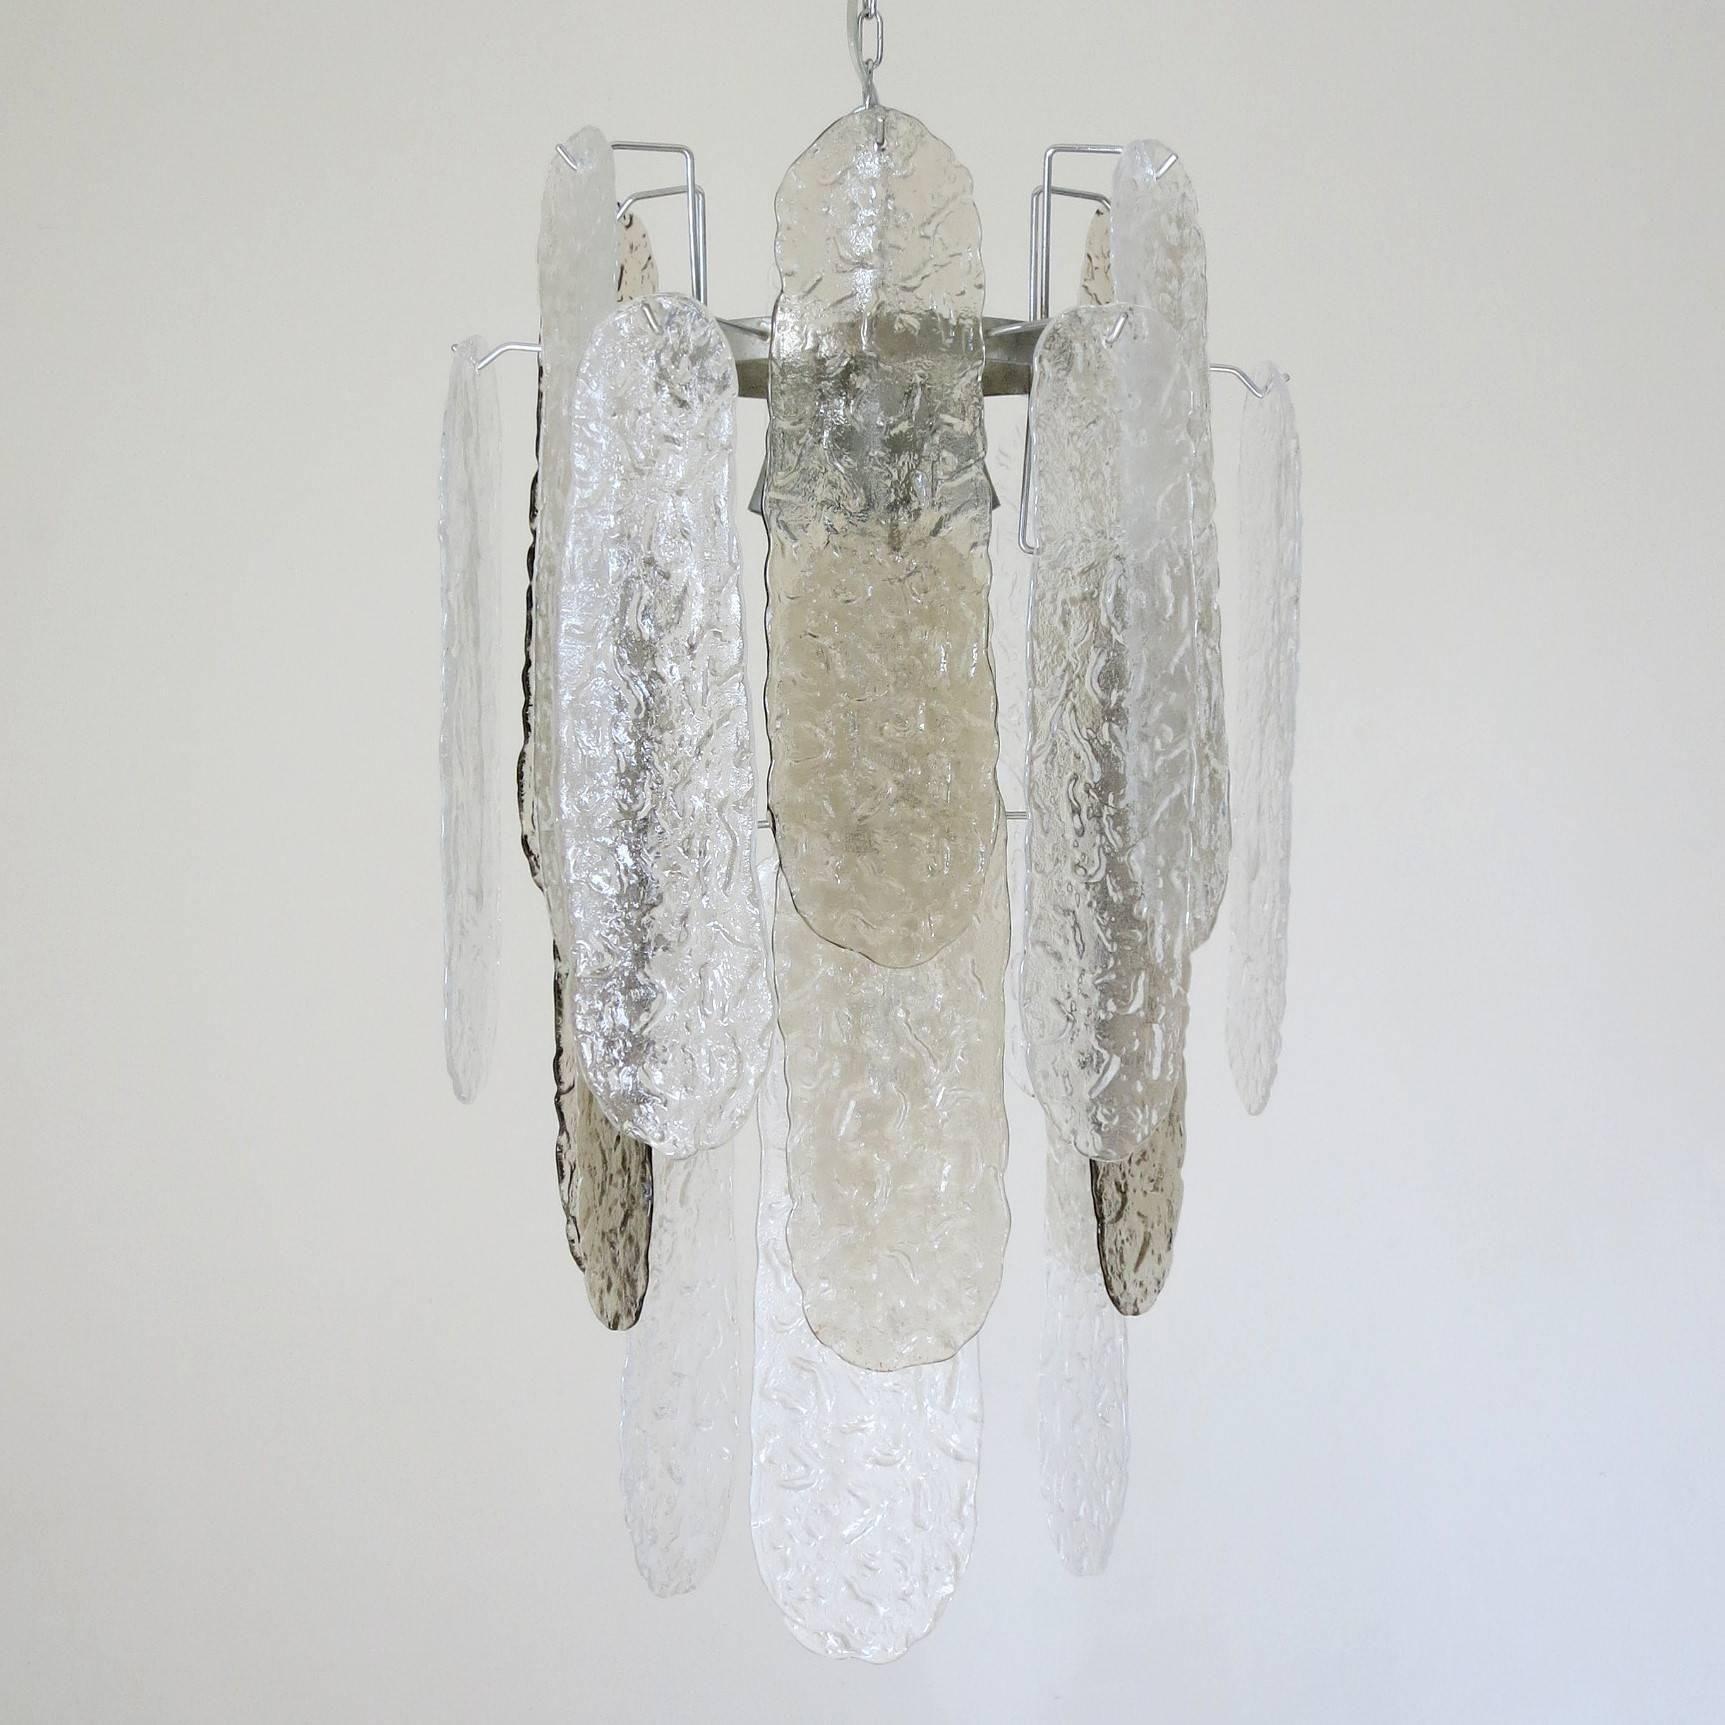 Vintage Italian chandelier with clear and smoky Murano glass planks, mounted on nickel frame. Designed by Mazzega, Italy, circa 1960s. 
Dimensions:
32H x 18